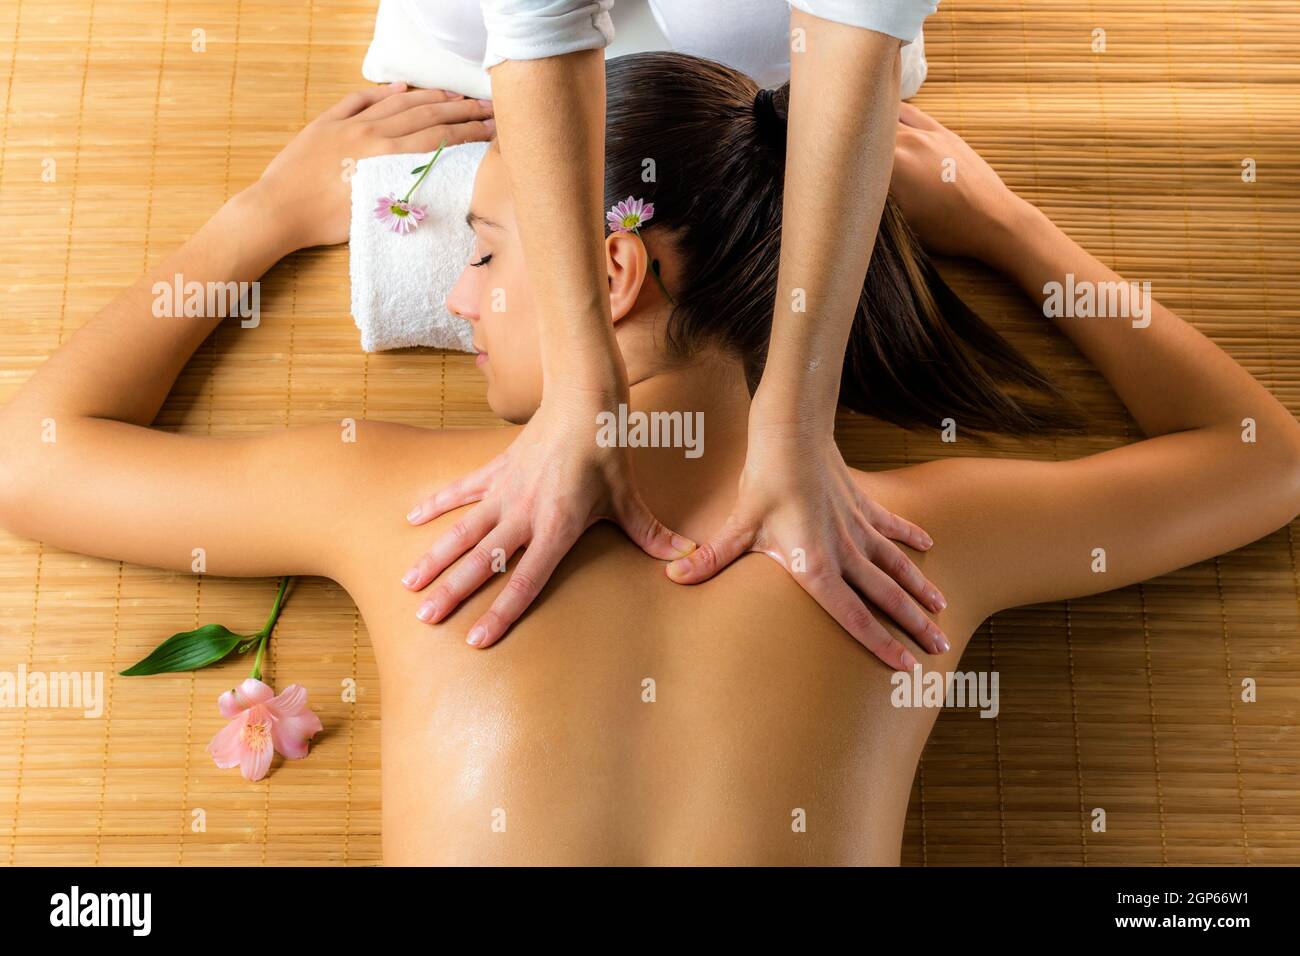 Close up top view of attractive woman enjoying healing back massage.Woman relaxing in low candle light atmosphere. Stock Photo